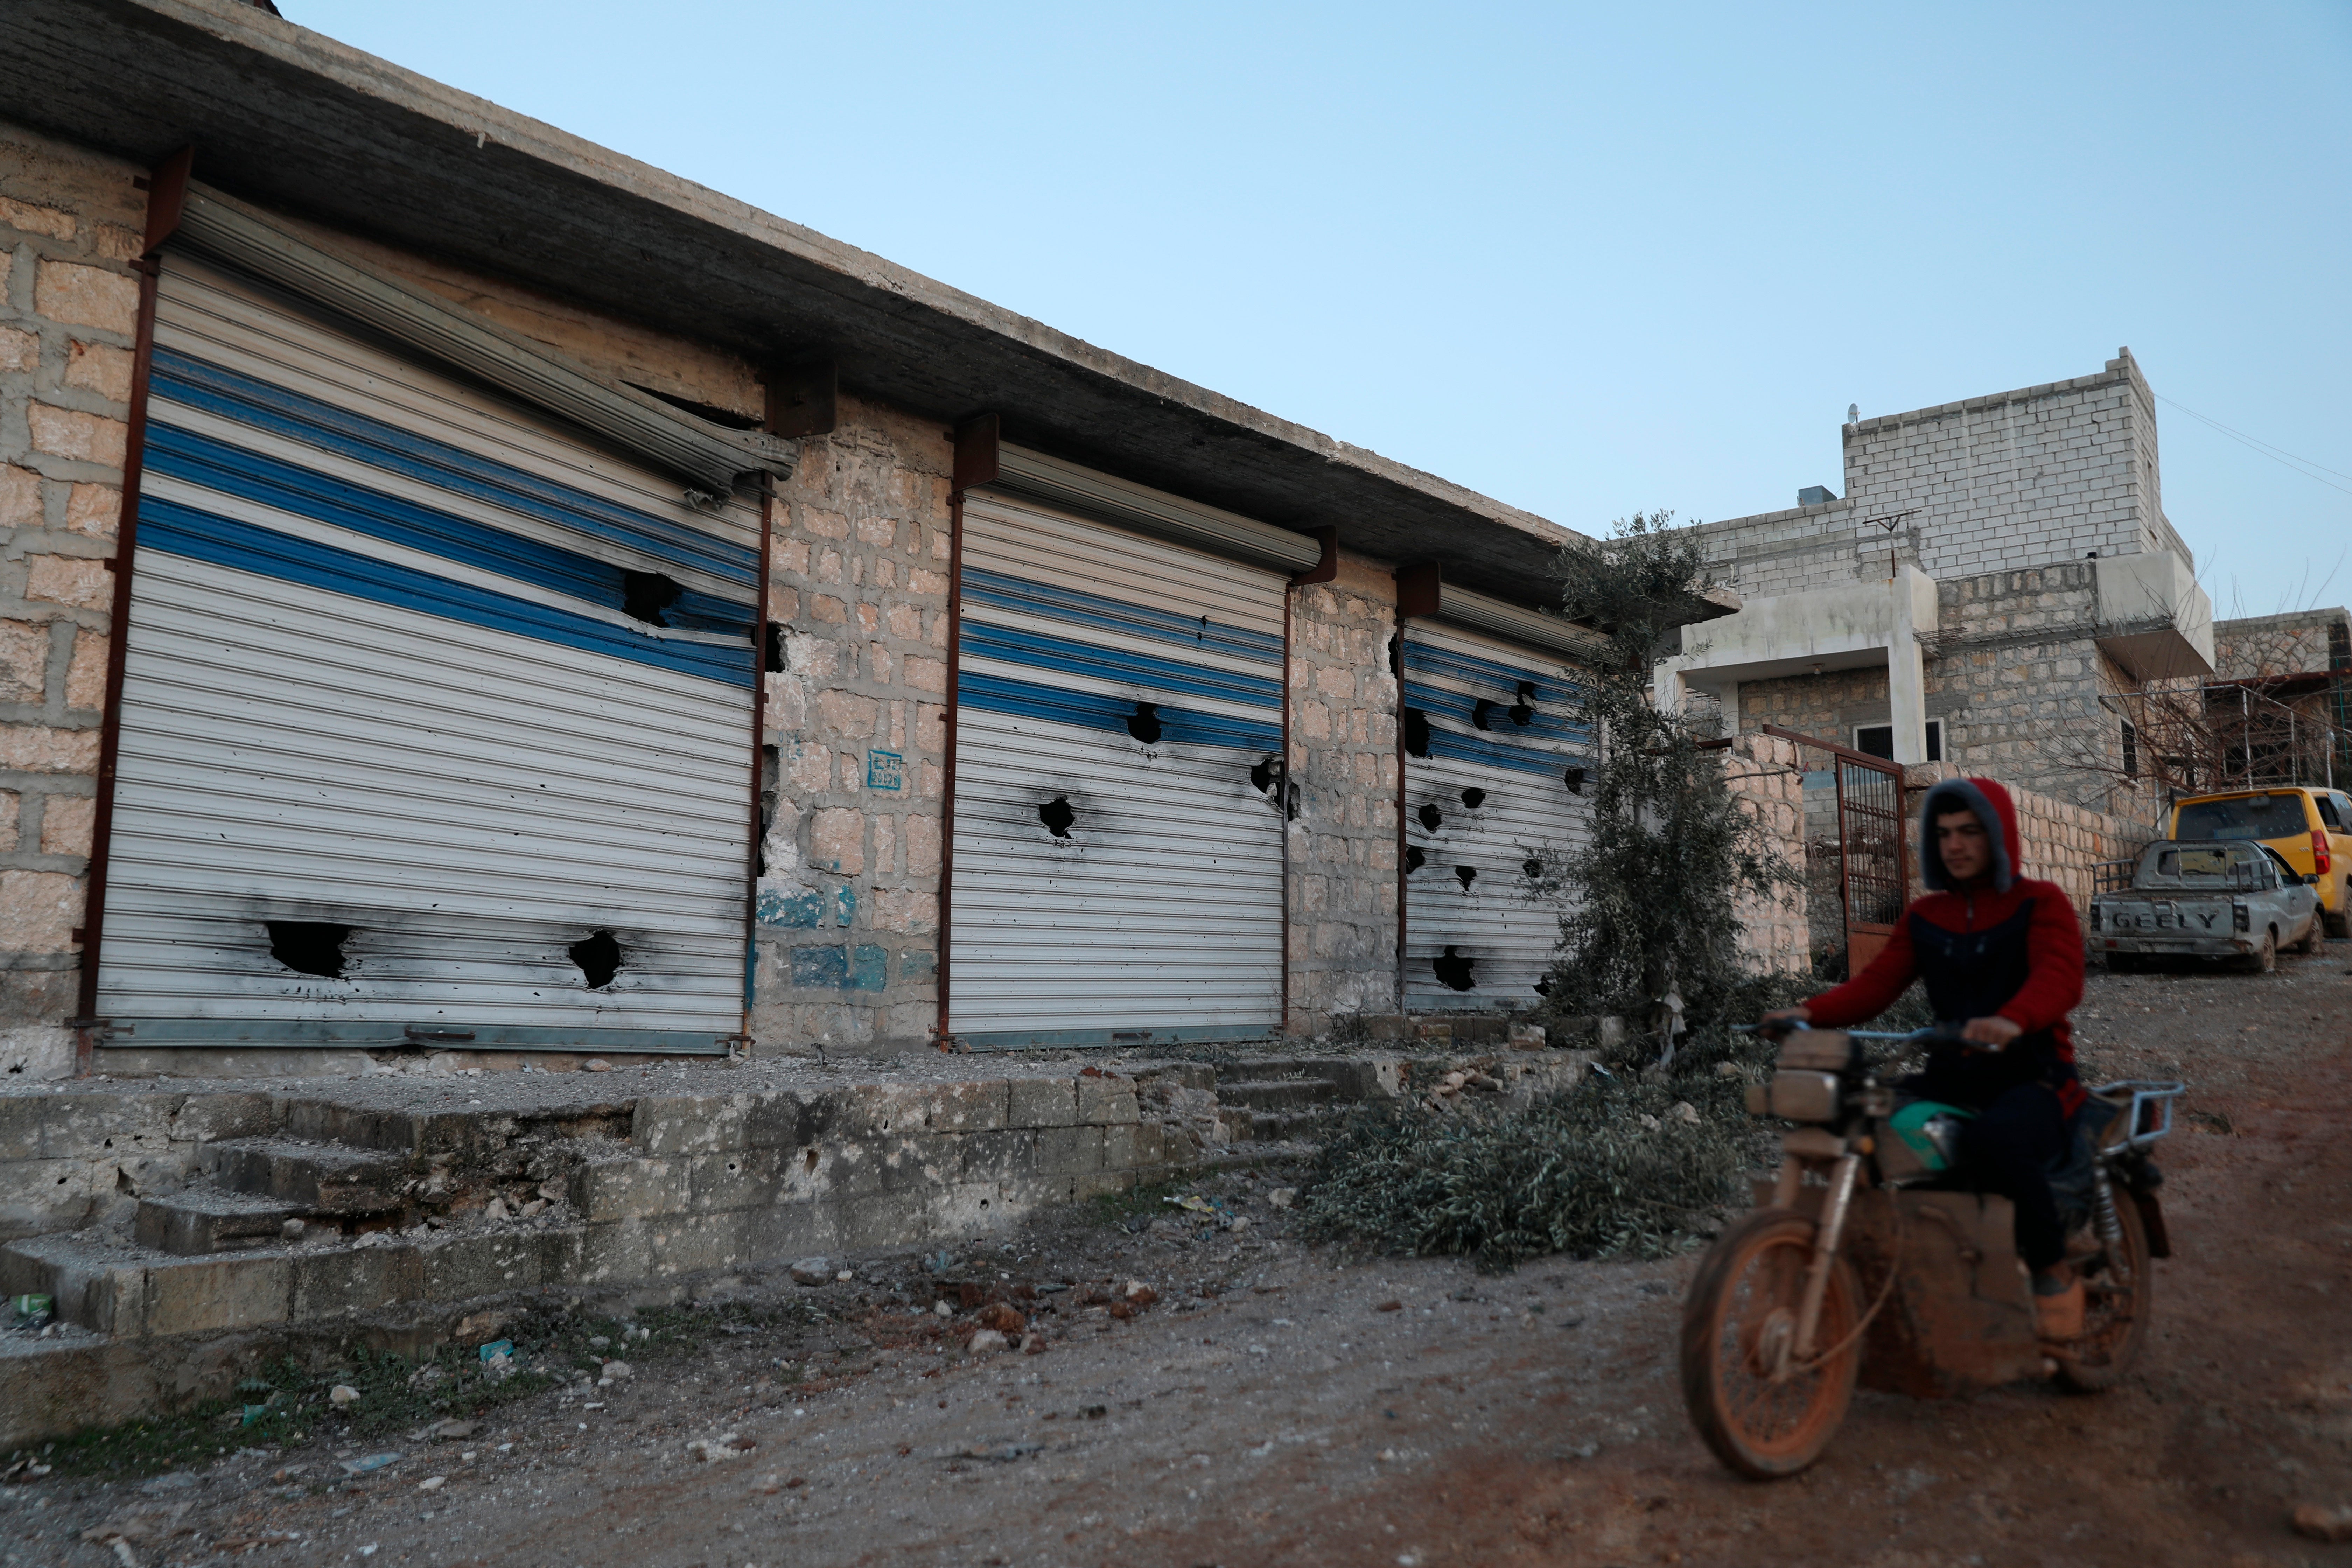 A Syrian man rides his motorcycle along damaged shops after an operation by the U.S. military in the Syrian village of Atmeh in Idlib province, Syria, Thursday, Feb. 3, 2022